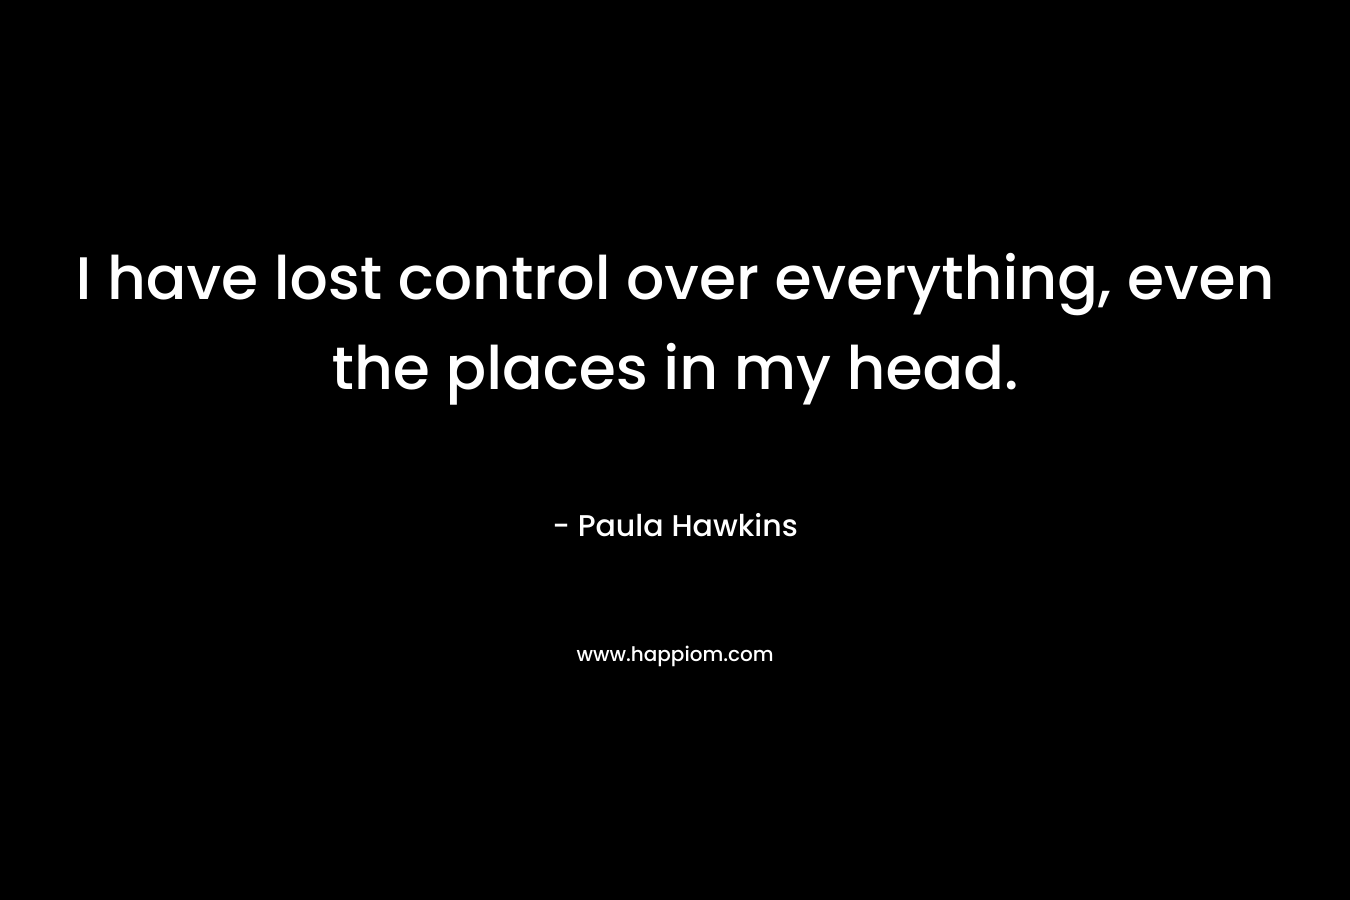 I have lost control over everything, even the places in my head. – Paula Hawkins